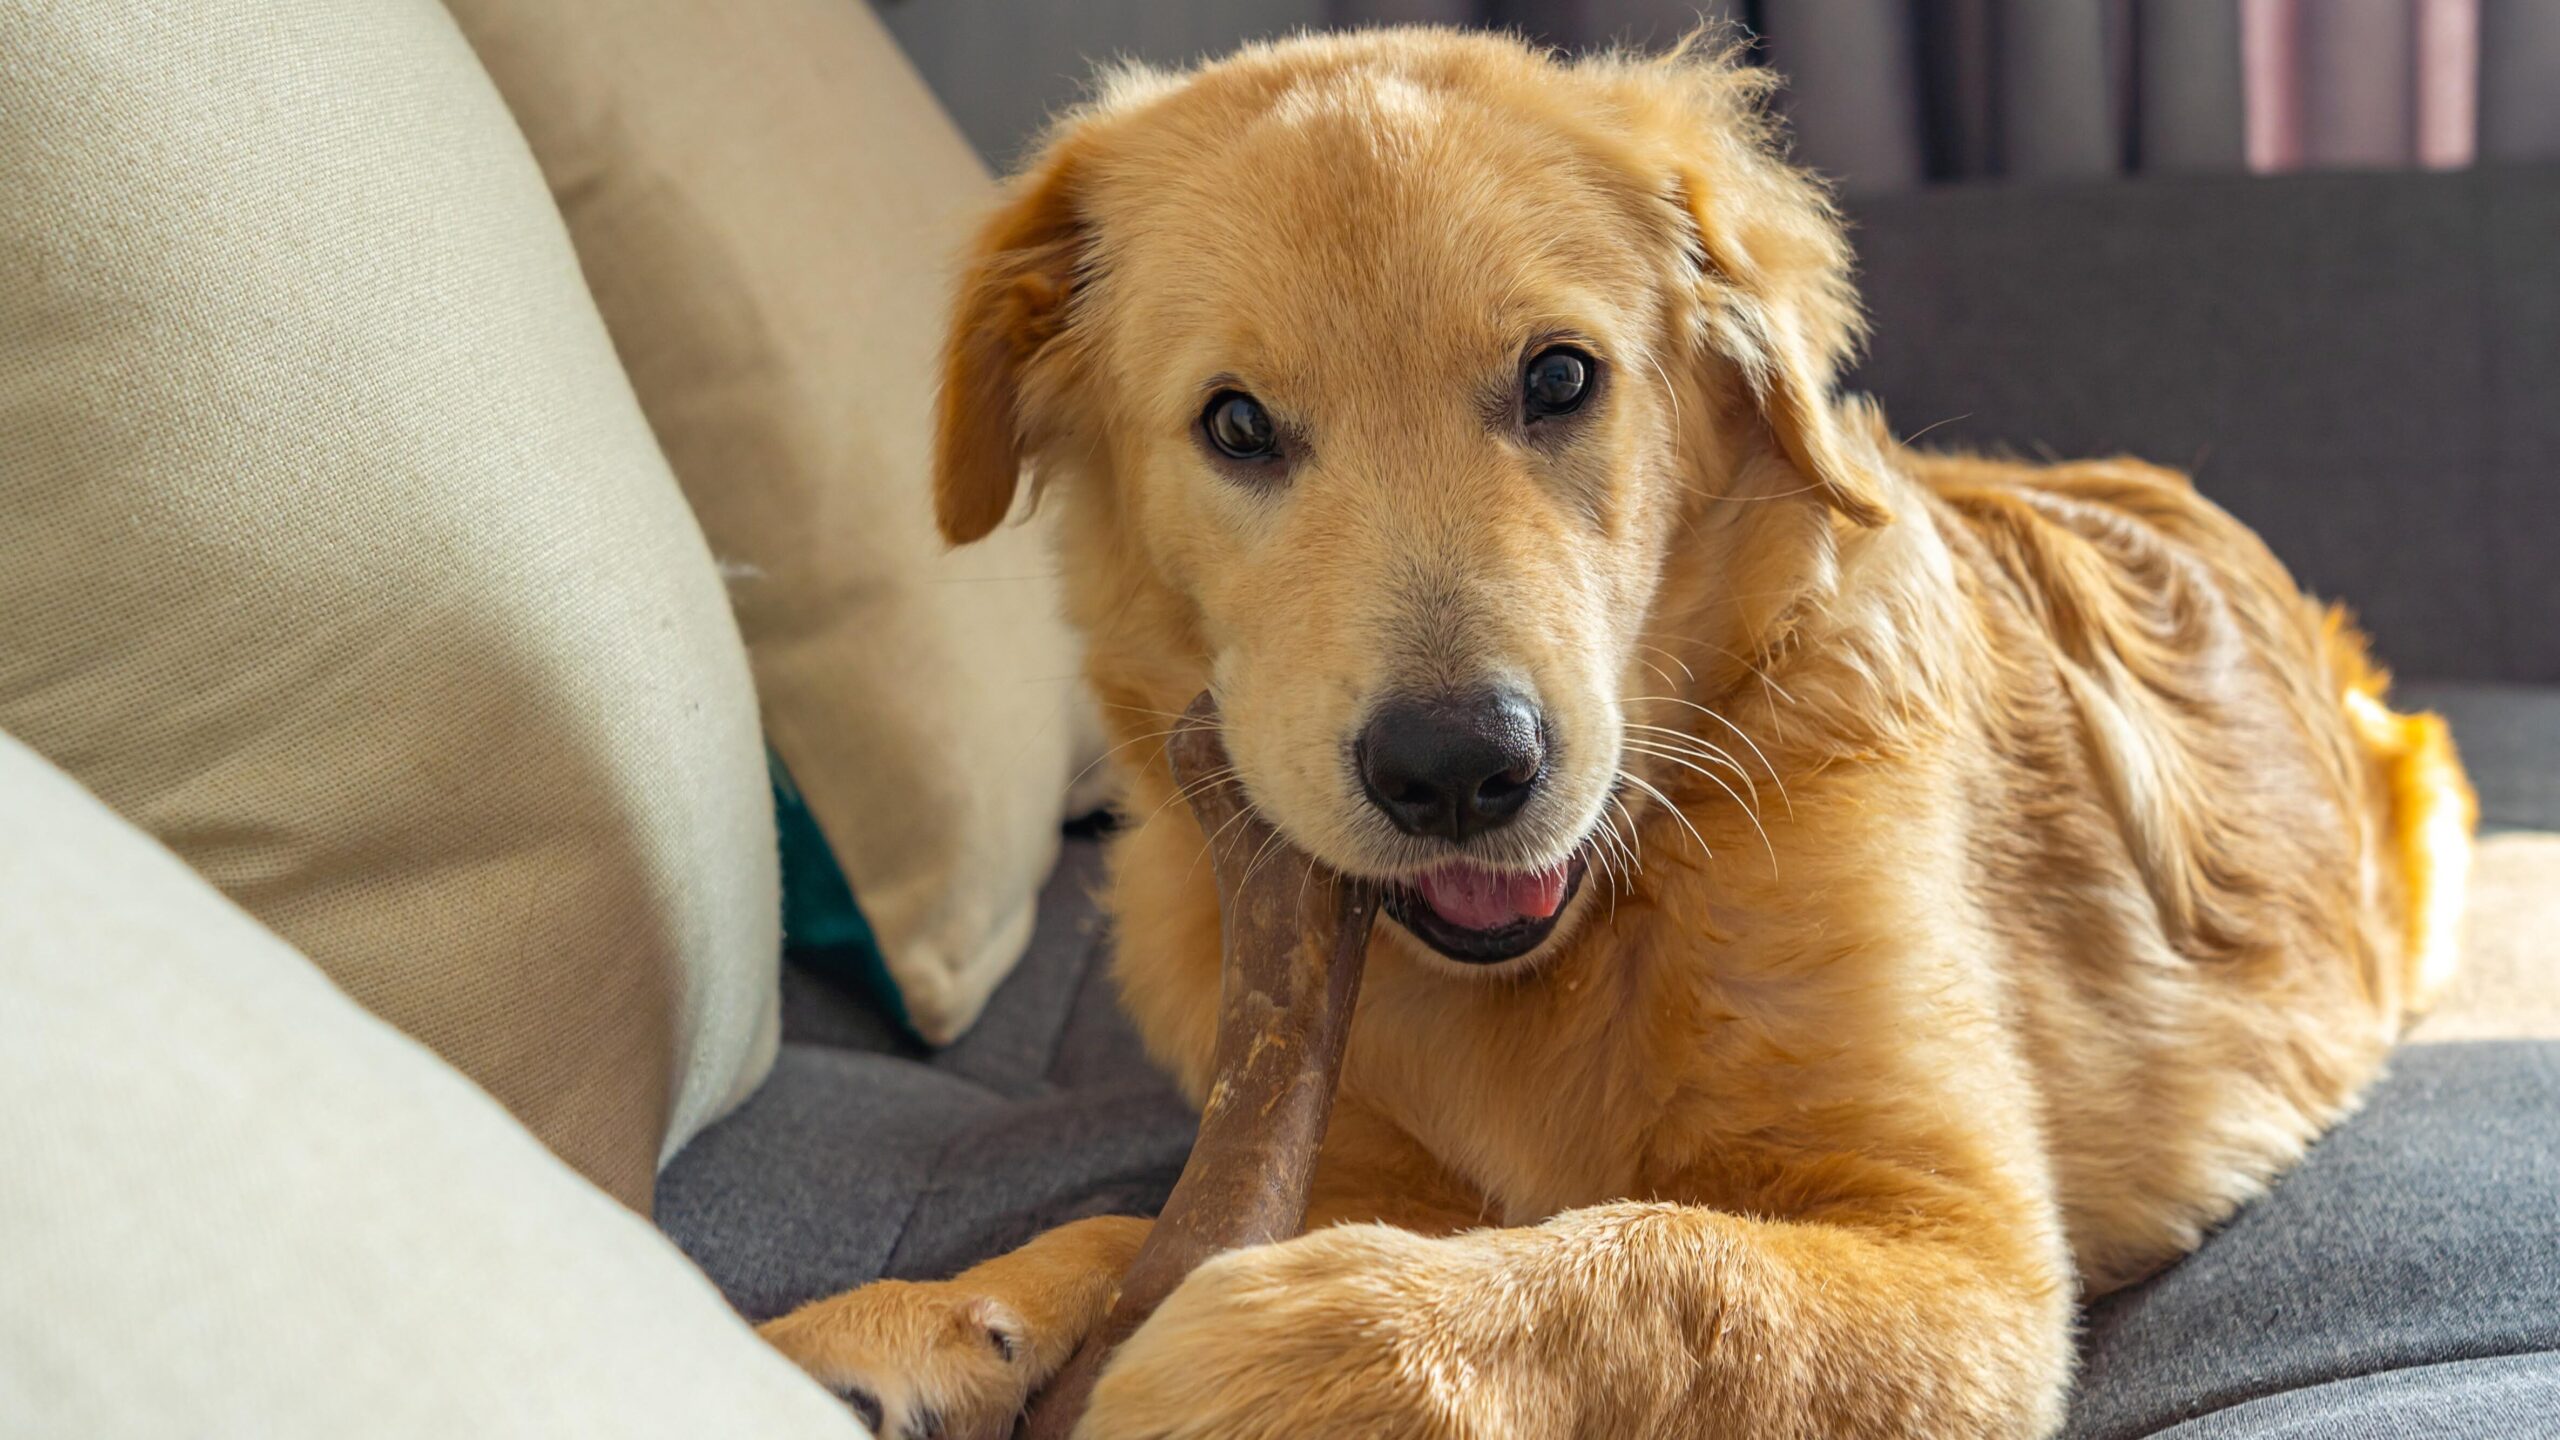 Adorable young golden retriever dog chewing the rawhide bone on sofa